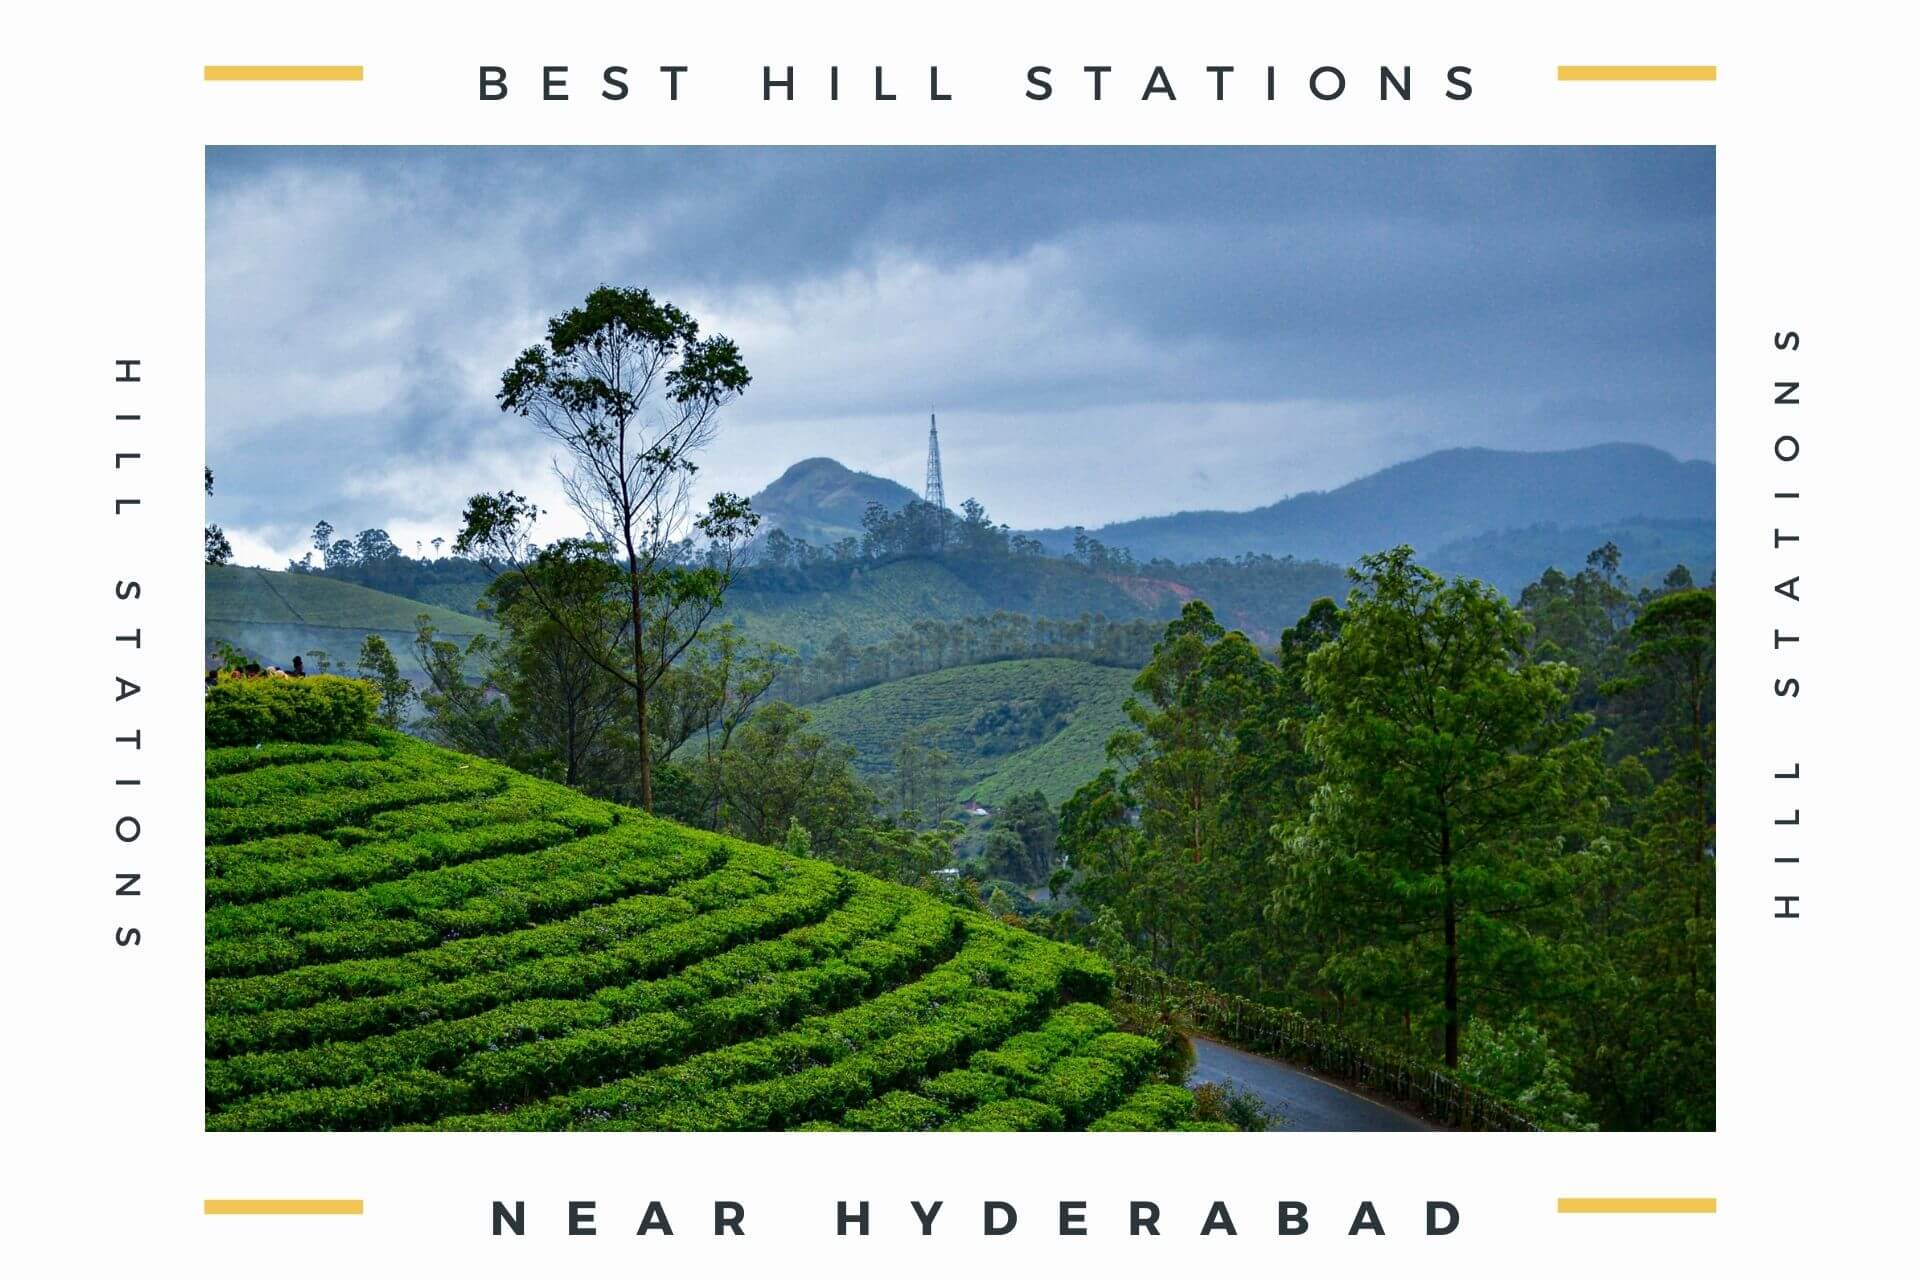 15 Best Hill Stations near Hyderabad